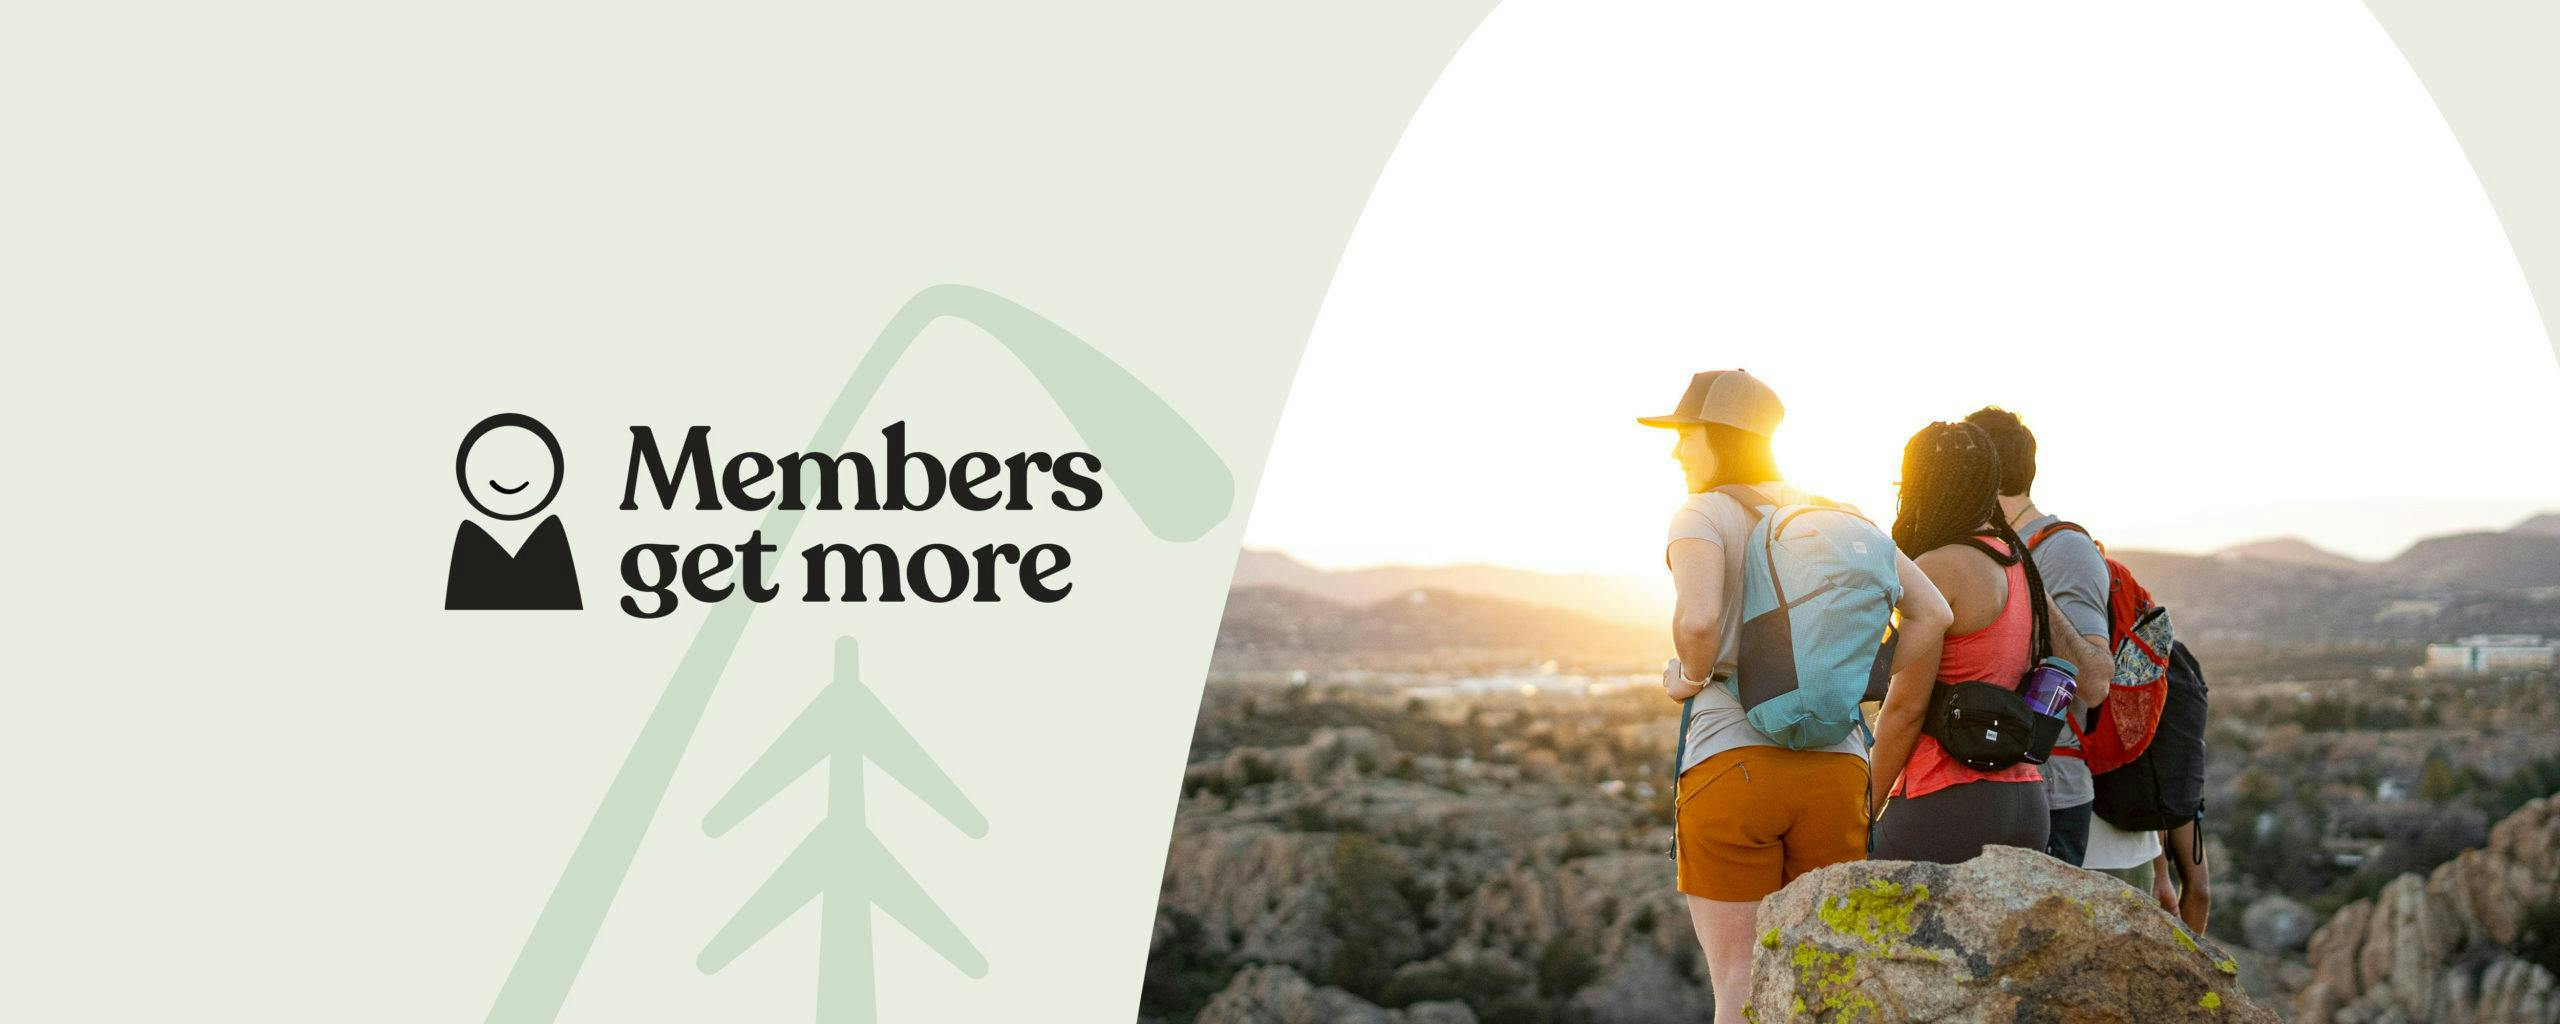 If you’re new, you can easily join with your next purchase. No strings, and it’s free. If you‘ve ever been a member, you remain a lifetime member of MEC.